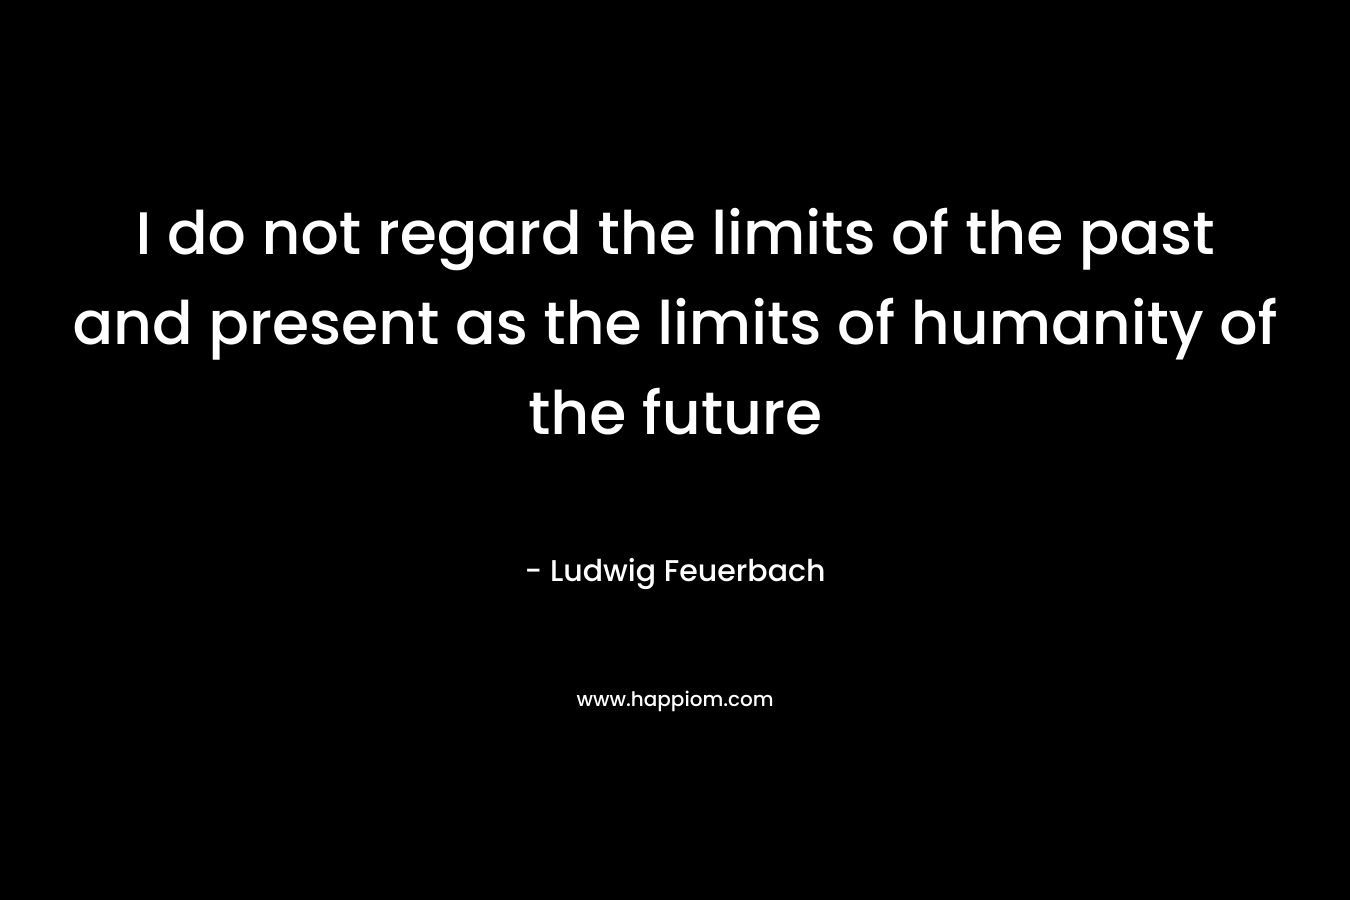 I do not regard the limits of the past and present as the limits of humanity of the future